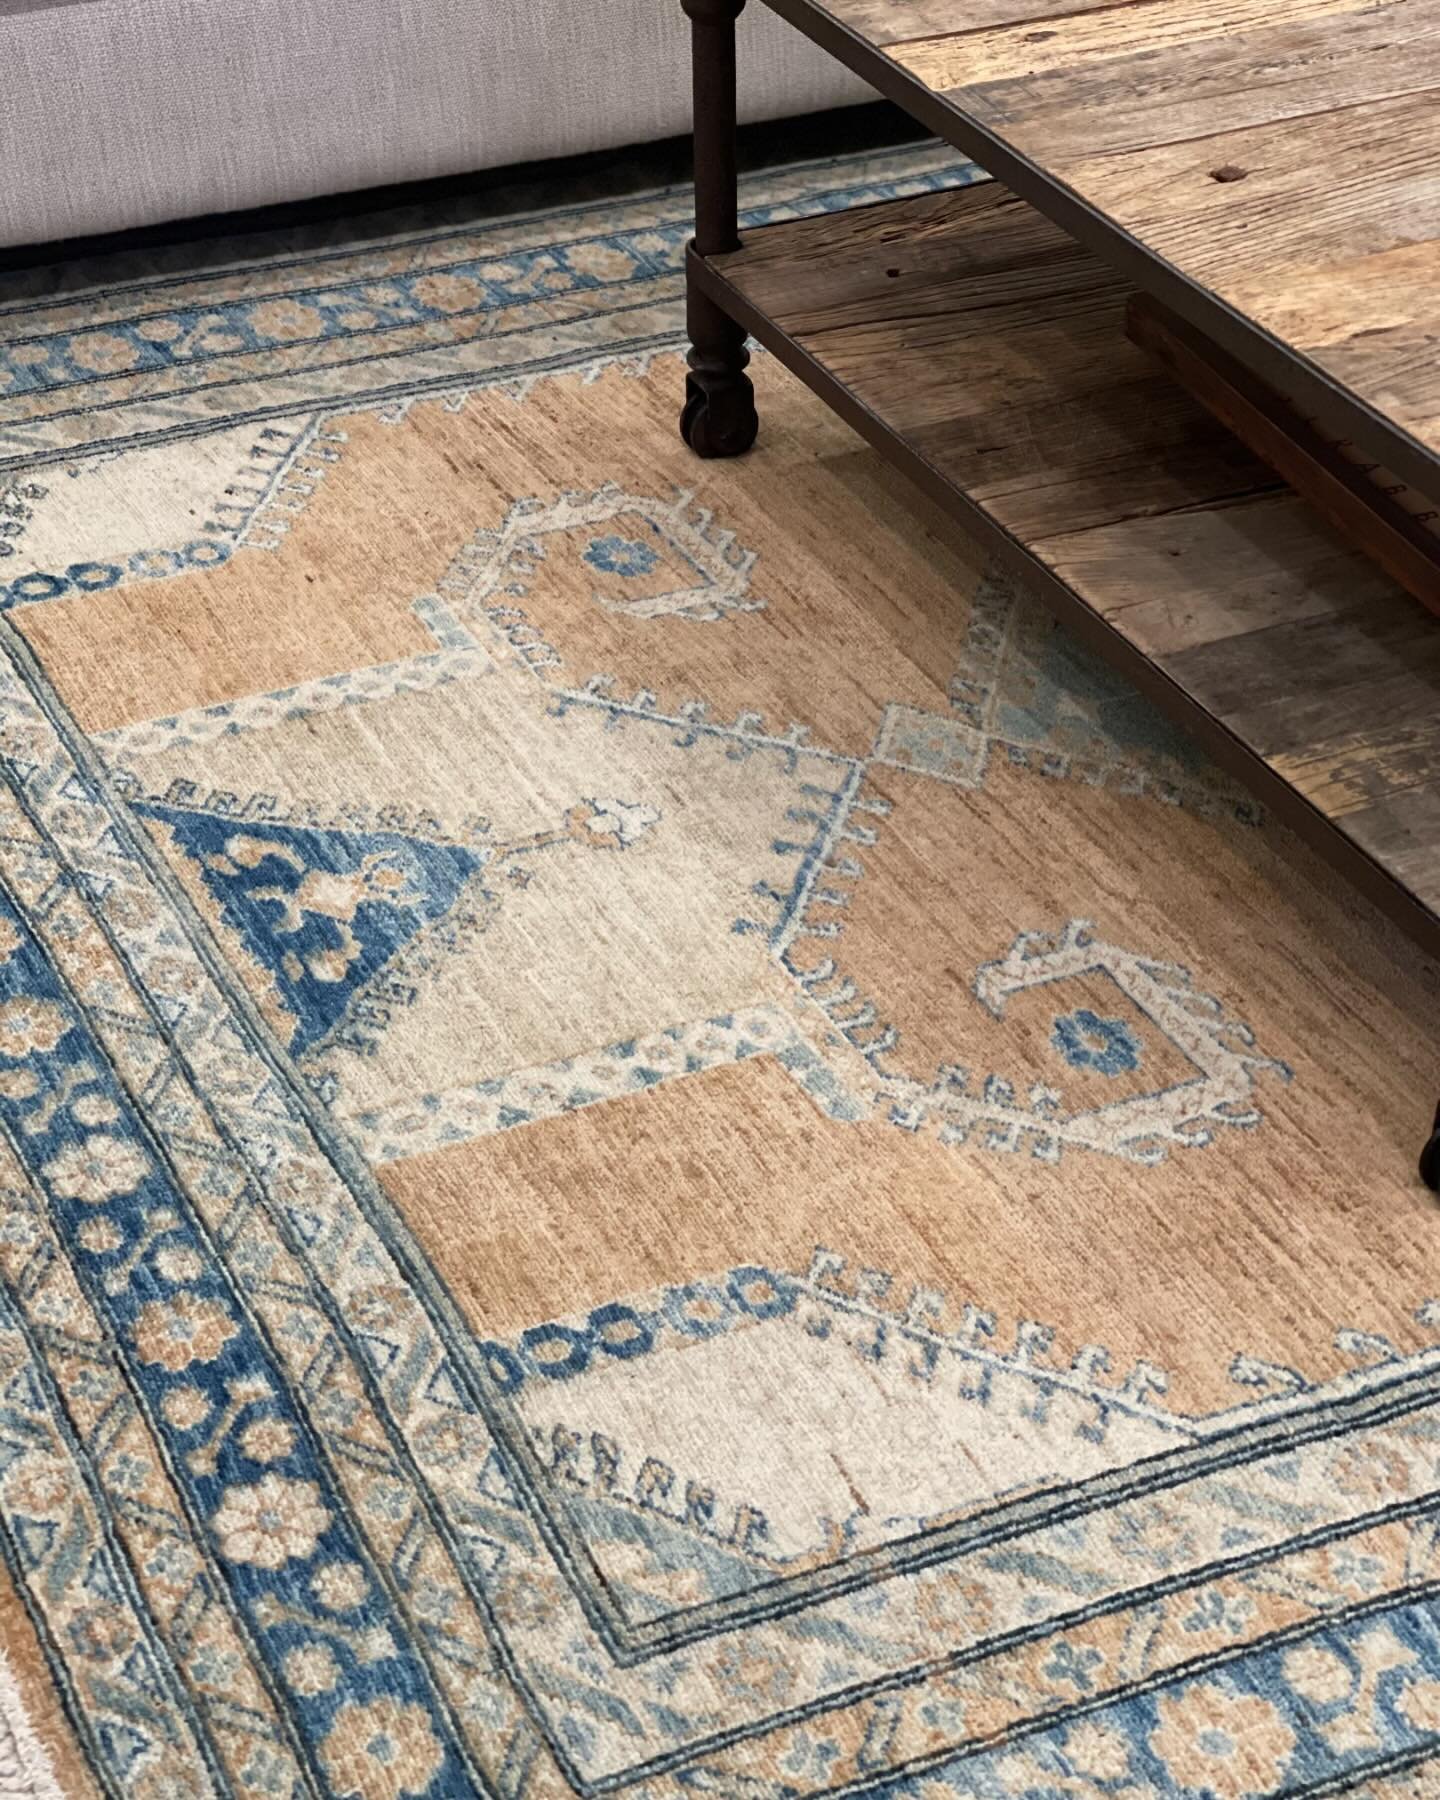 One of a kind rugs 🤩

We have many sources to find a one of a kind rug to add unique layers and pops of color!
.
.
.
#oneofakind #rug #layeredrugs #interiordesign #interiordecor #interiorphilosophy #interiorphilosophyatl #atlantadesigners